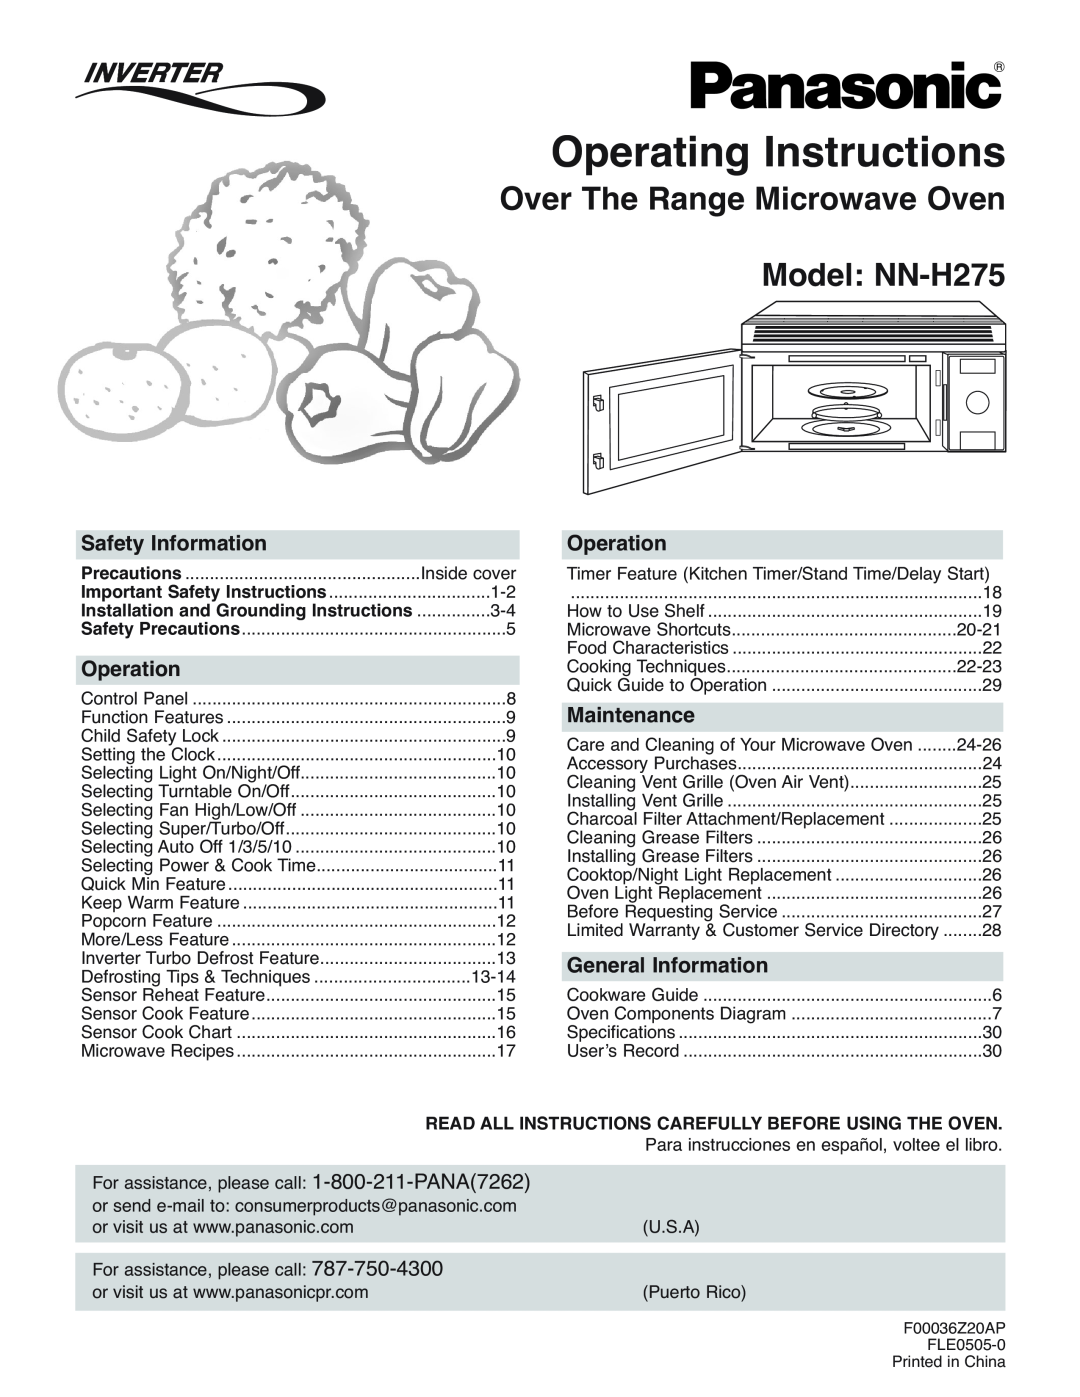 Panasonic operating instructions Operating Instructions, Over The Range Microwave Oven Model NN-H275, Operation 